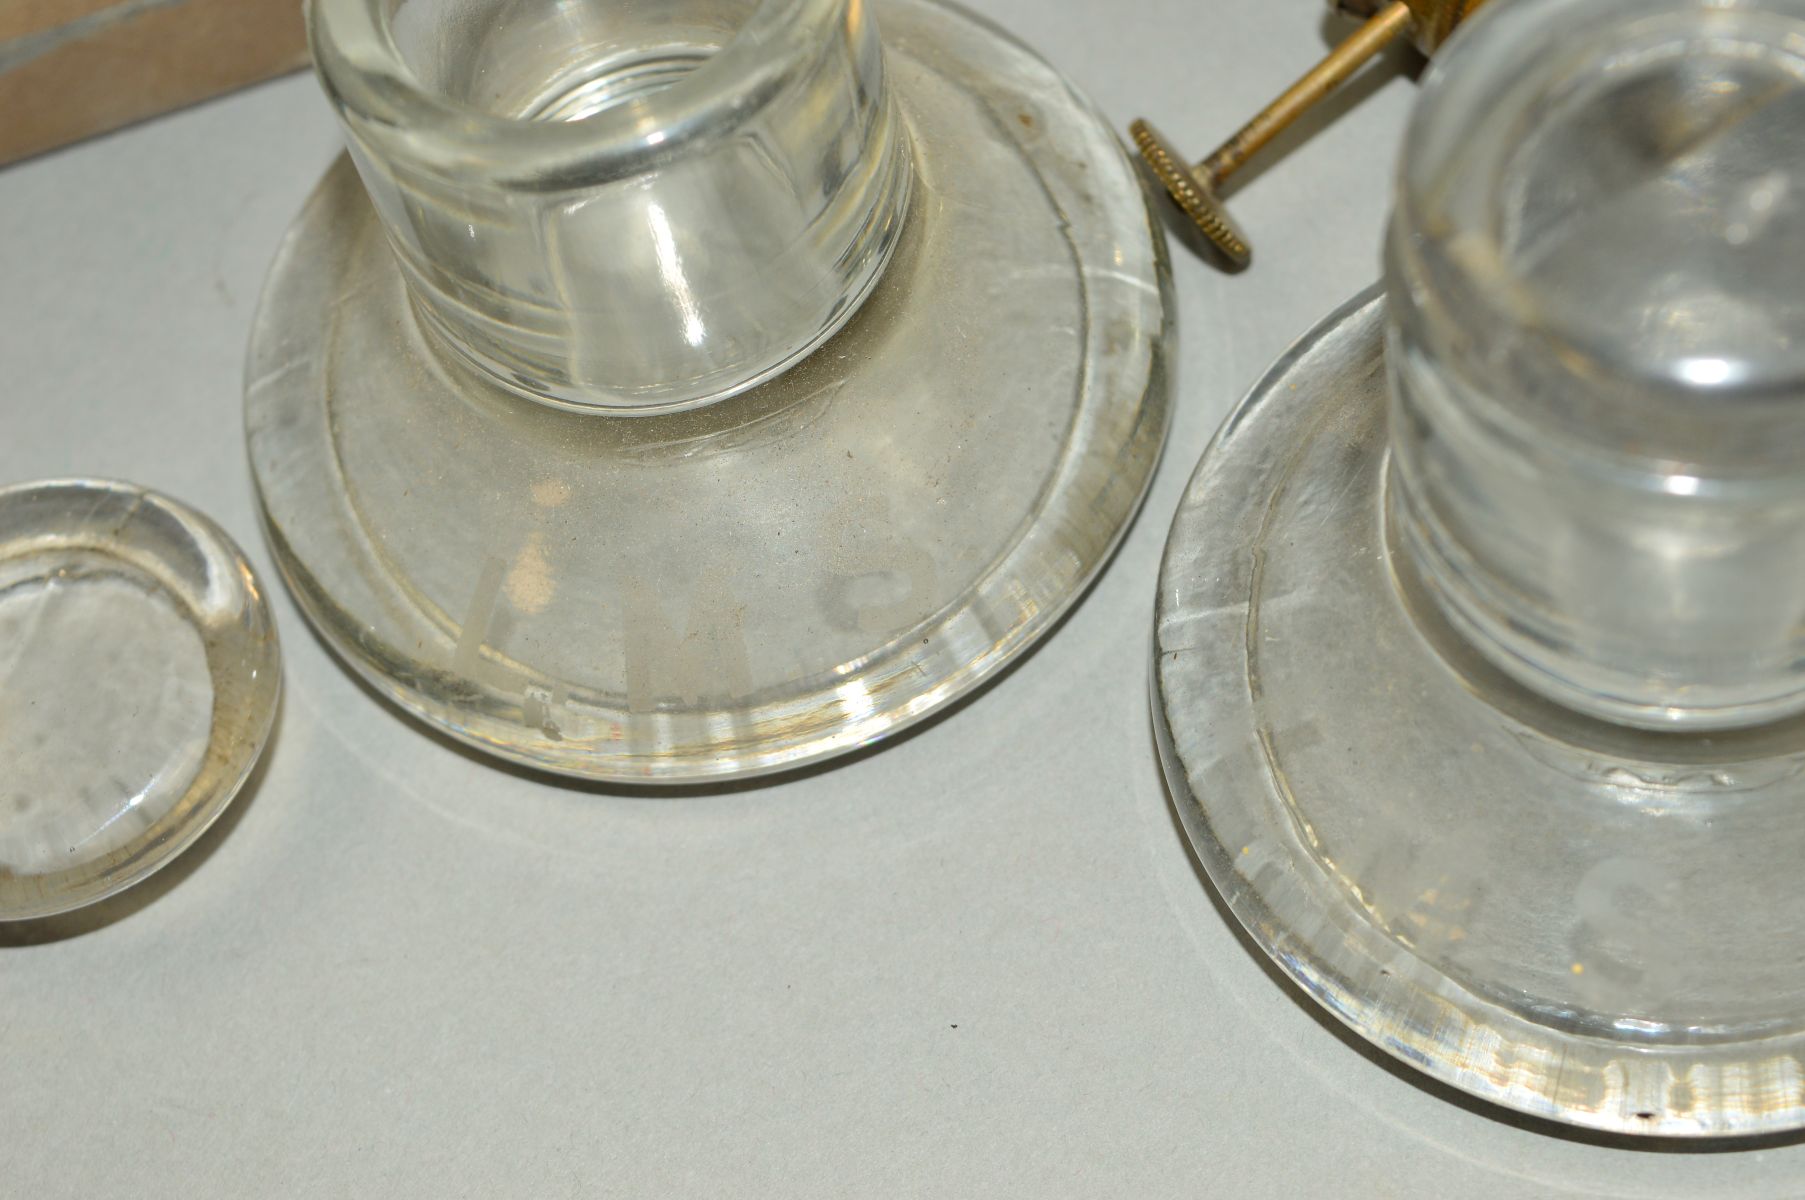 A PAIR OF L.M.S. GLASS INKWELLS, both complete with lids, have few minor marks but no chips or - Image 2 of 5